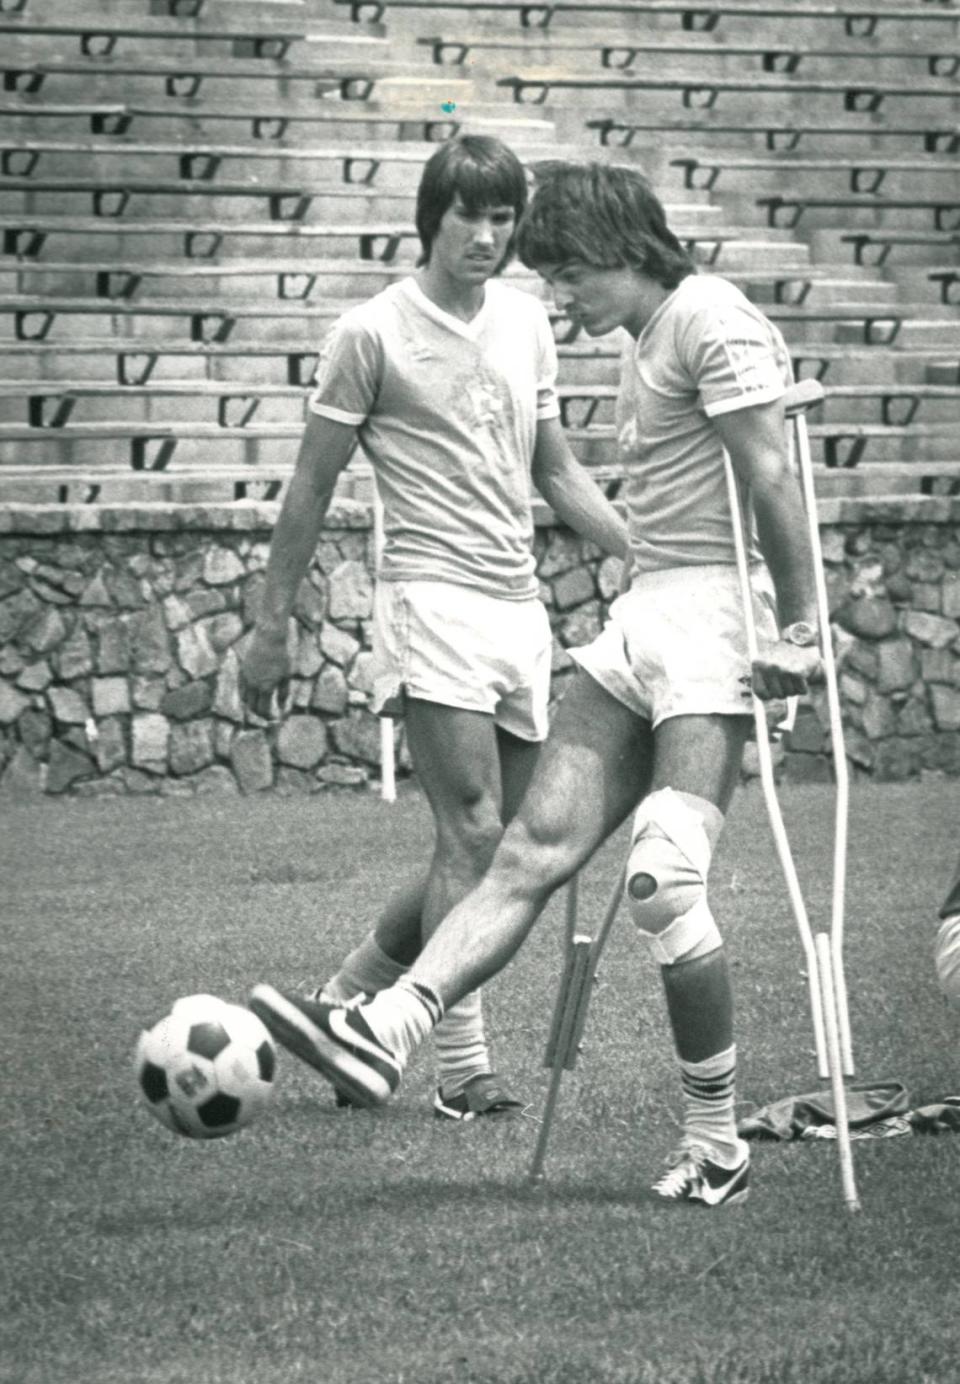 Tony Suarez ended up badly hurting both his knees playing soccer, which cut down on both his speed and lateral movement. He would still come to practice sometimes and kick the ball while on crutches.